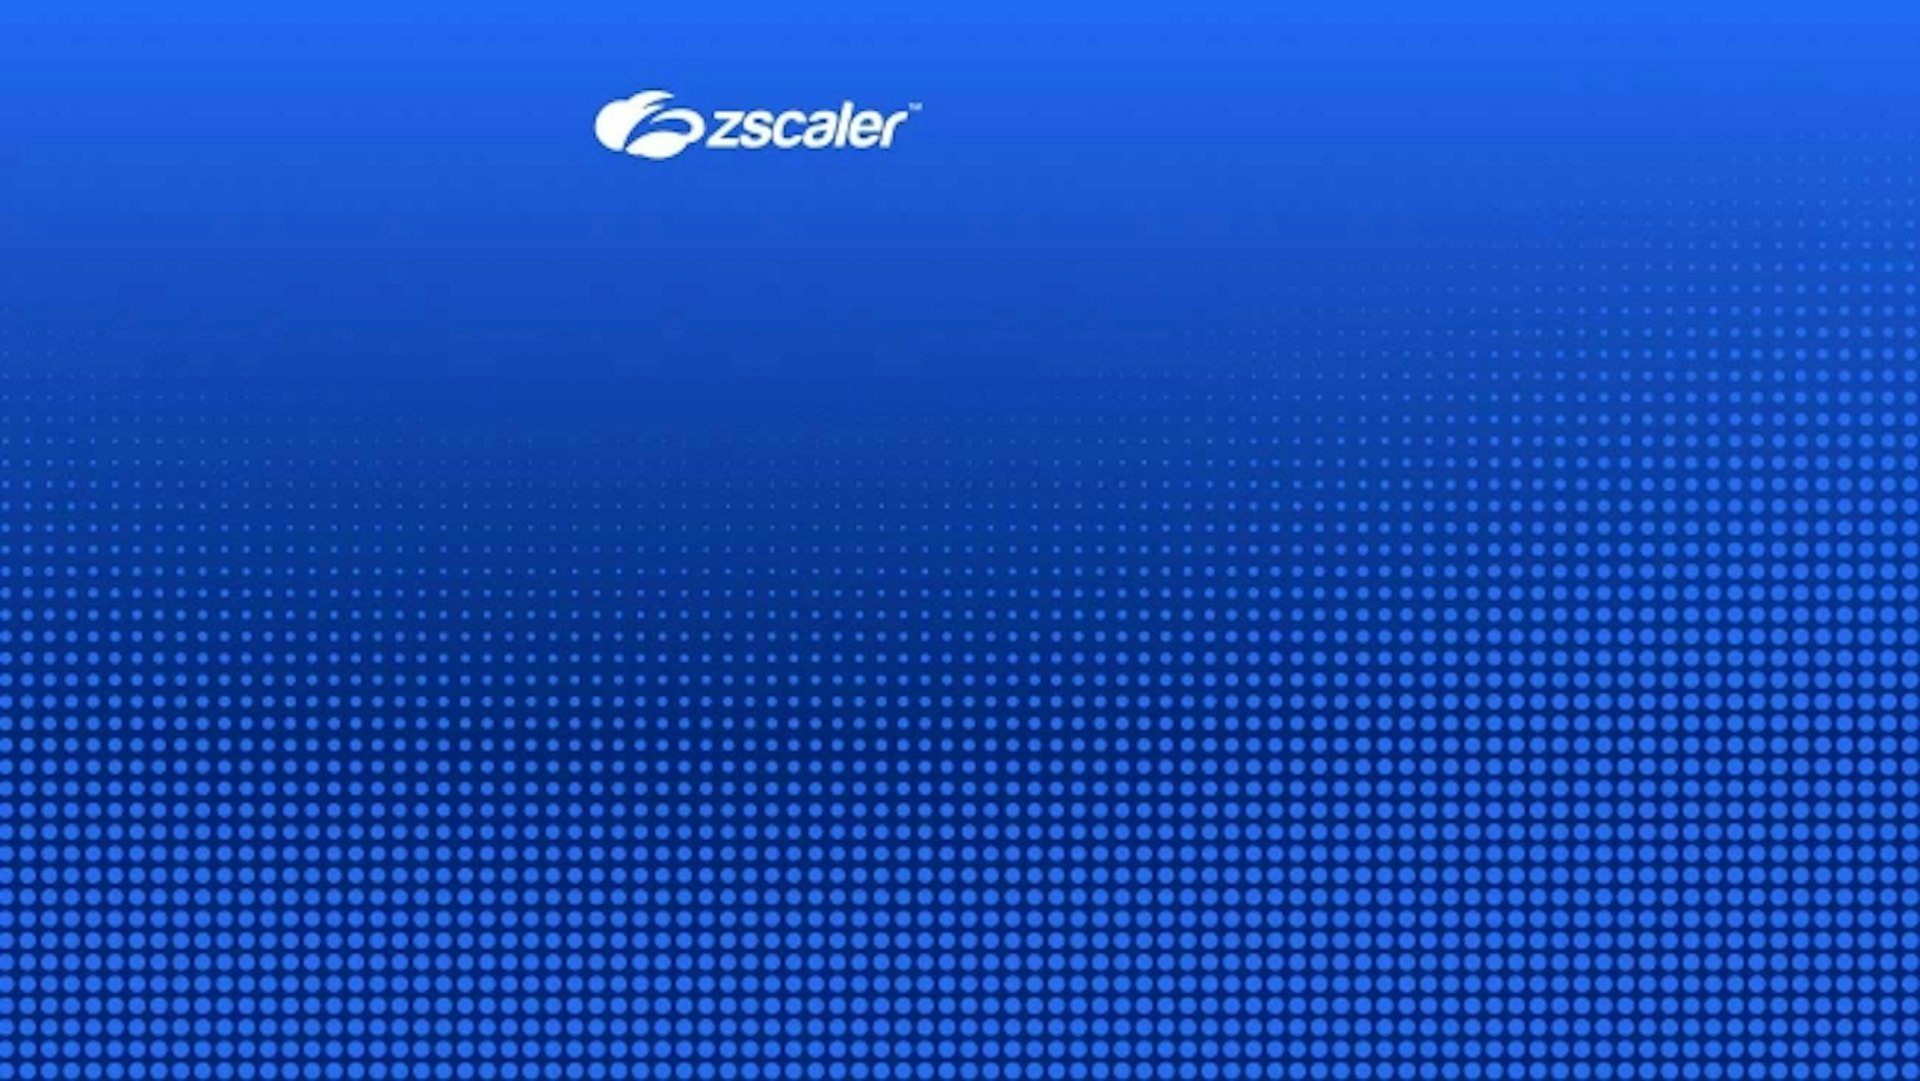 Optimize Your Digital Experiences with Zscaler